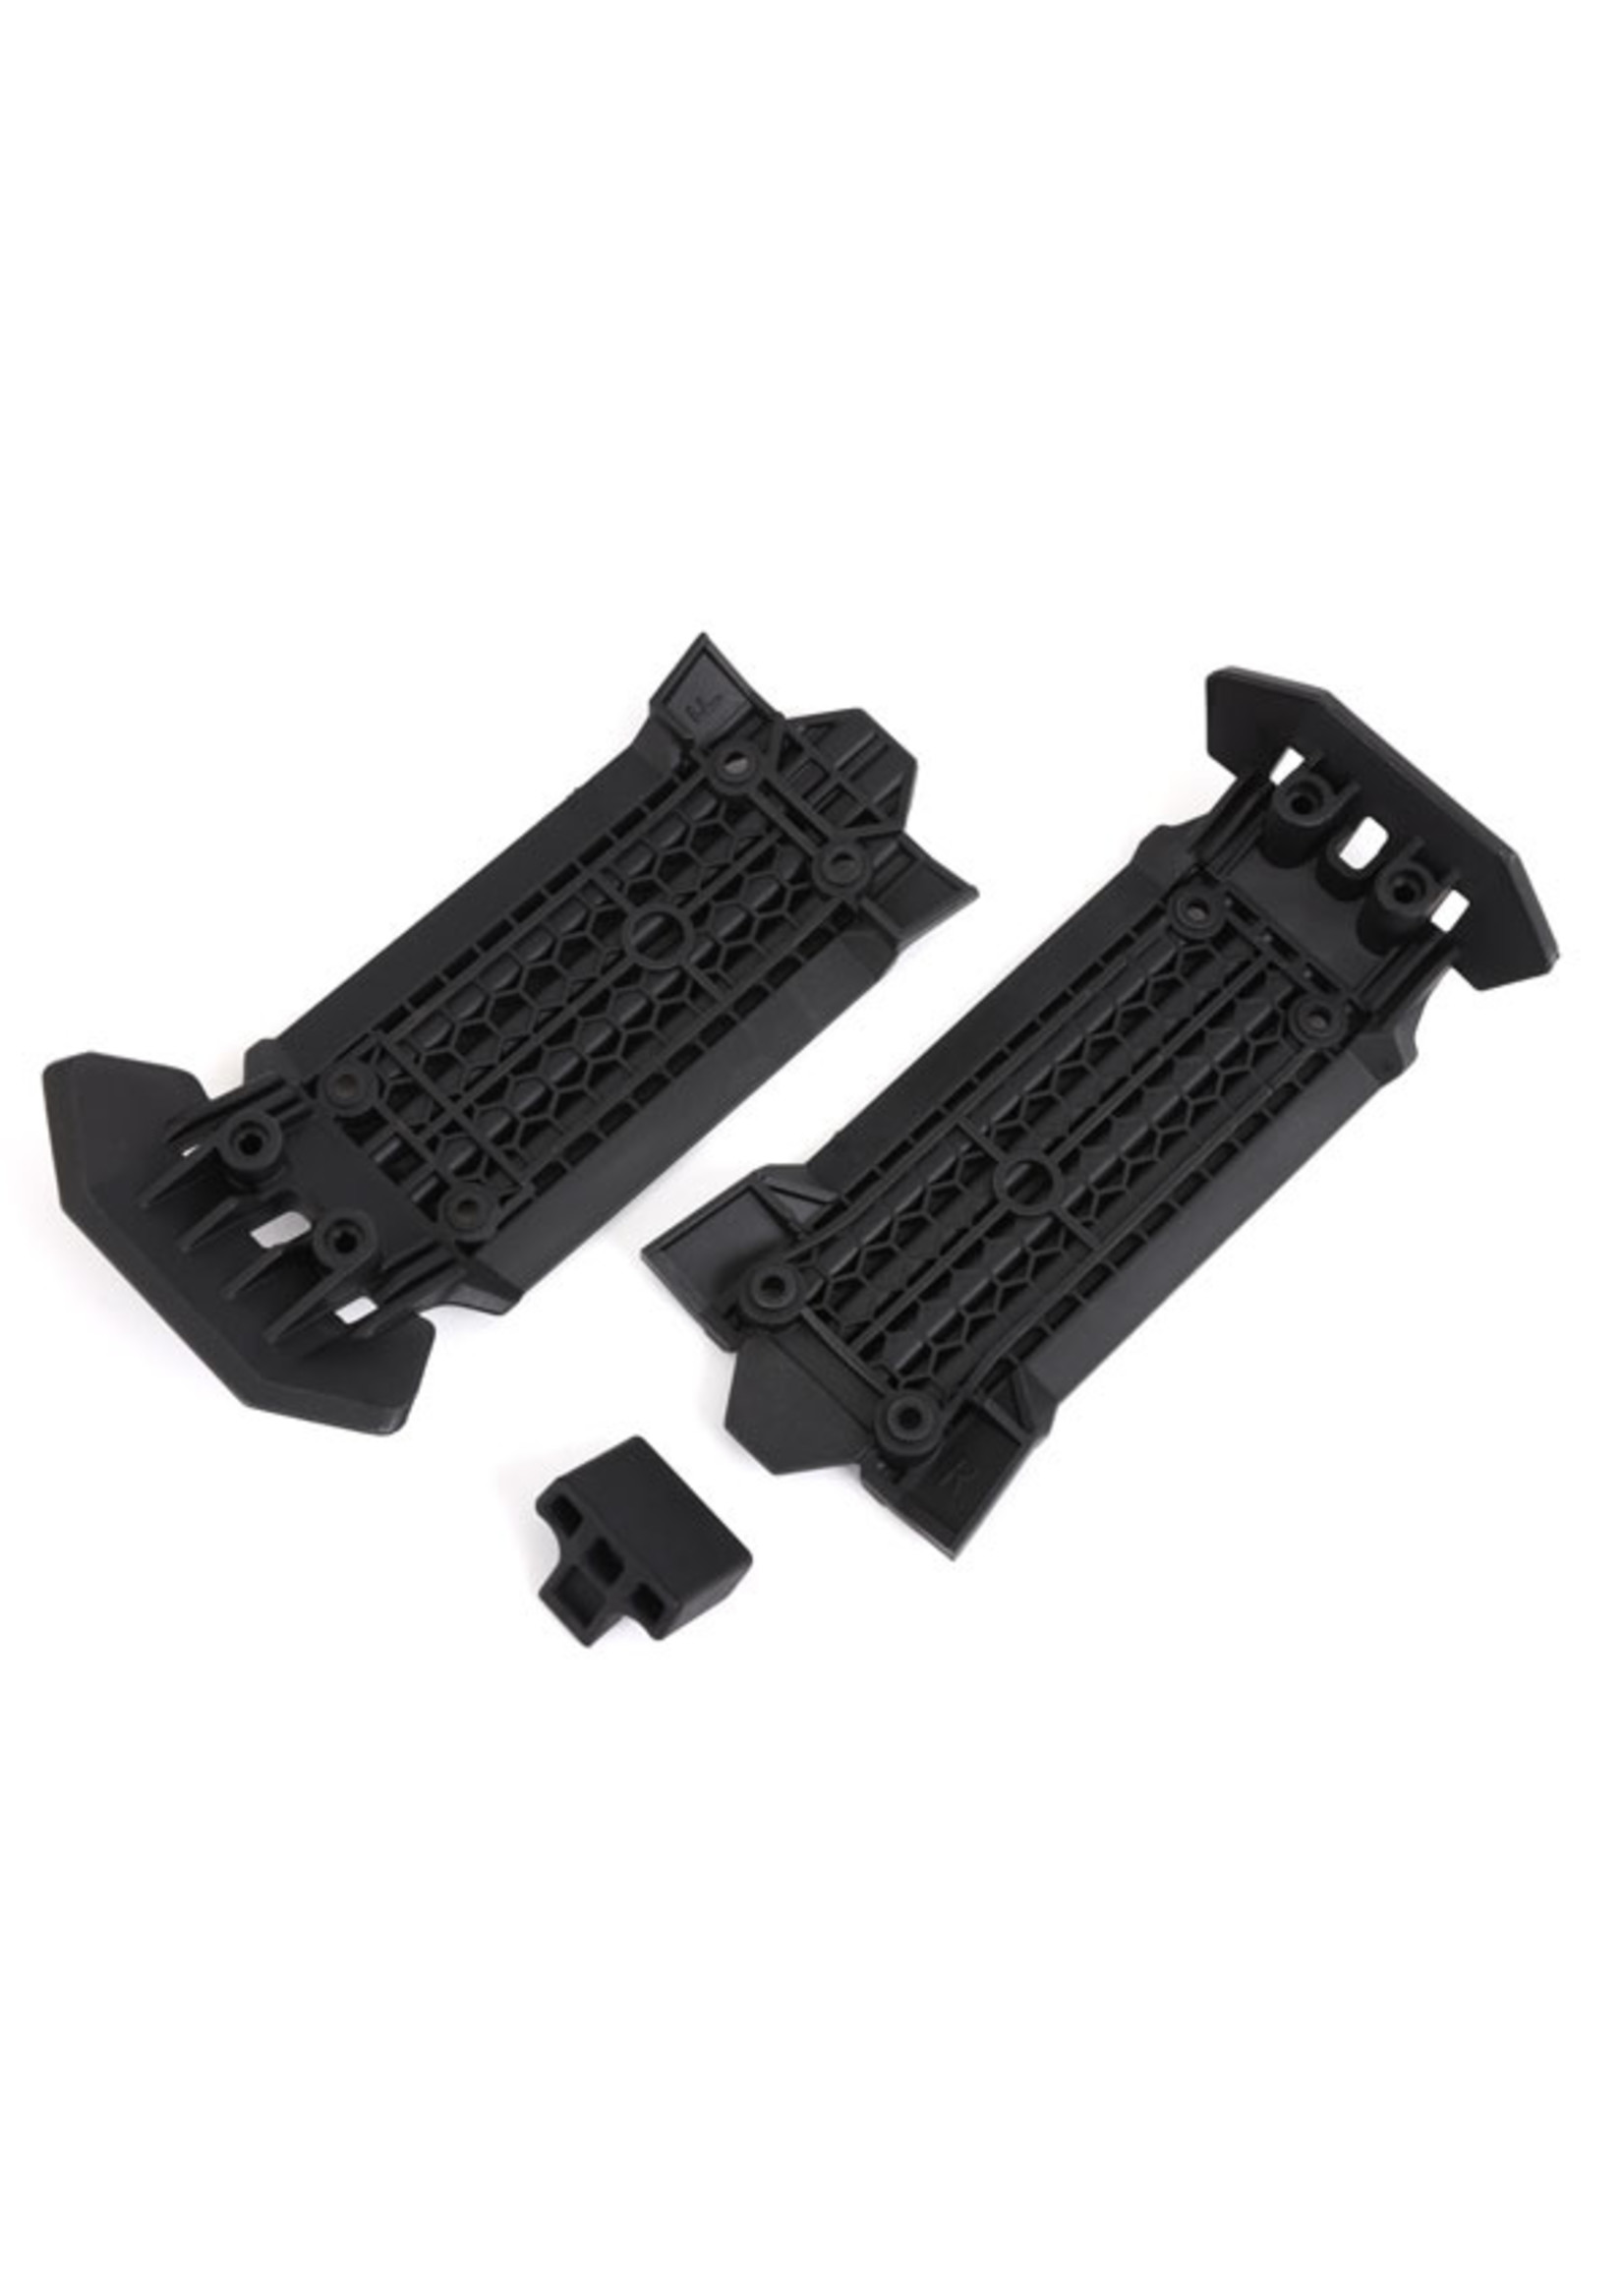 Traxxas 7844 - Skidplate With Impact Cushion, Front & Rear